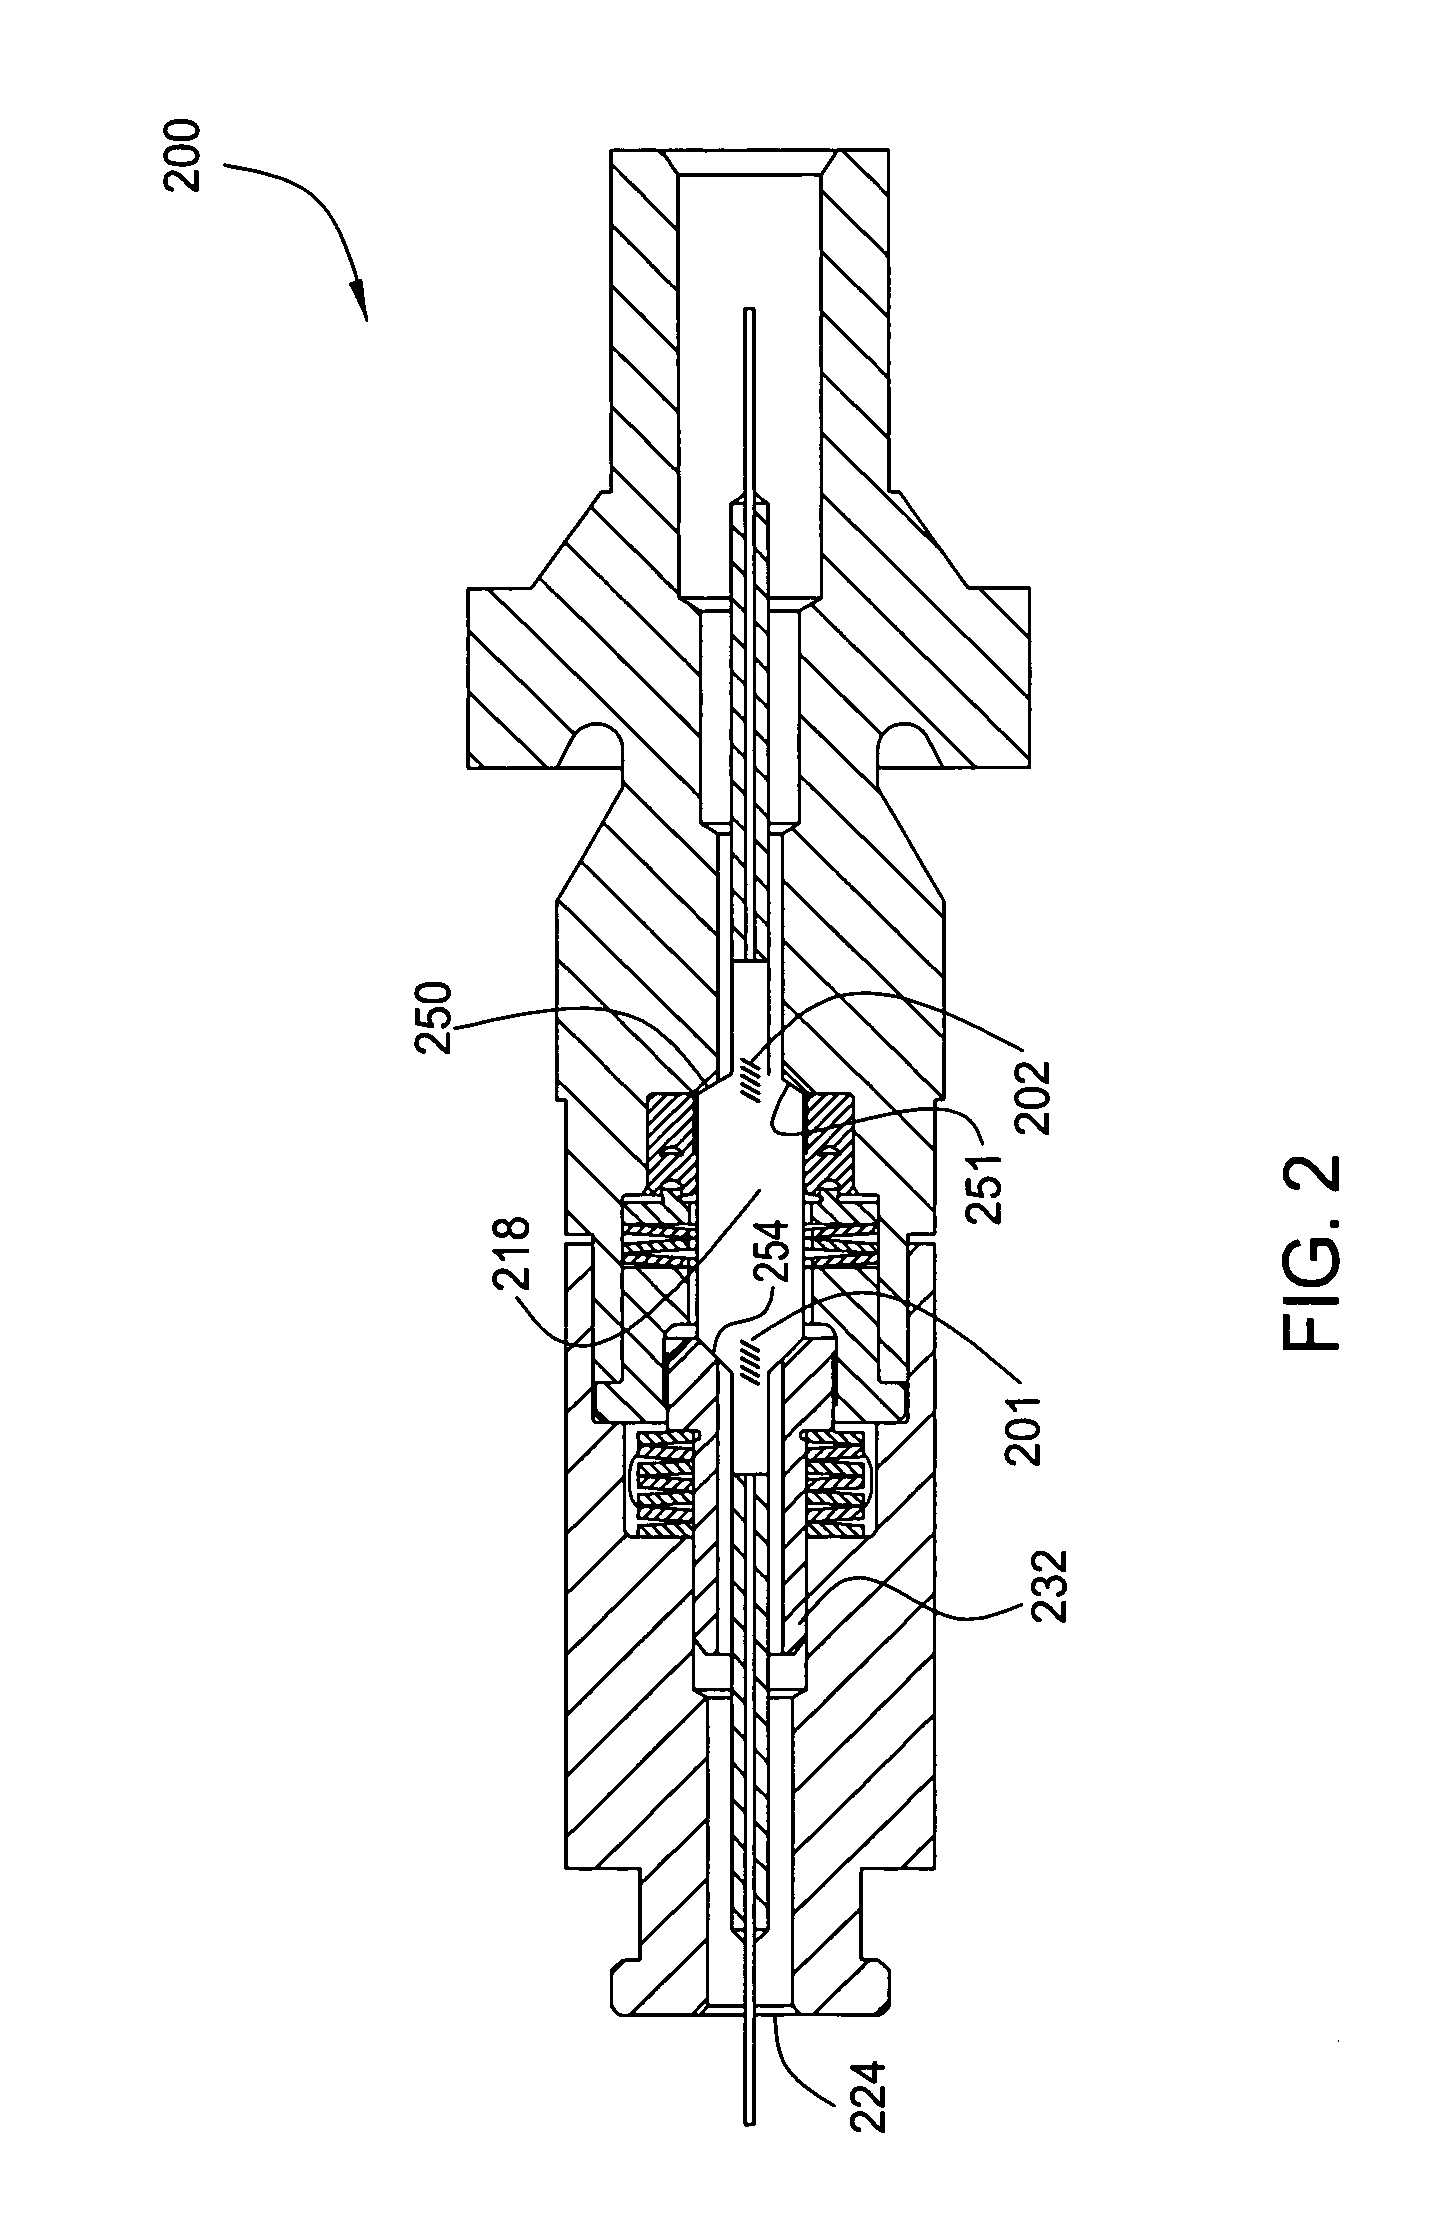 Optical waveguide feedthrough assembly